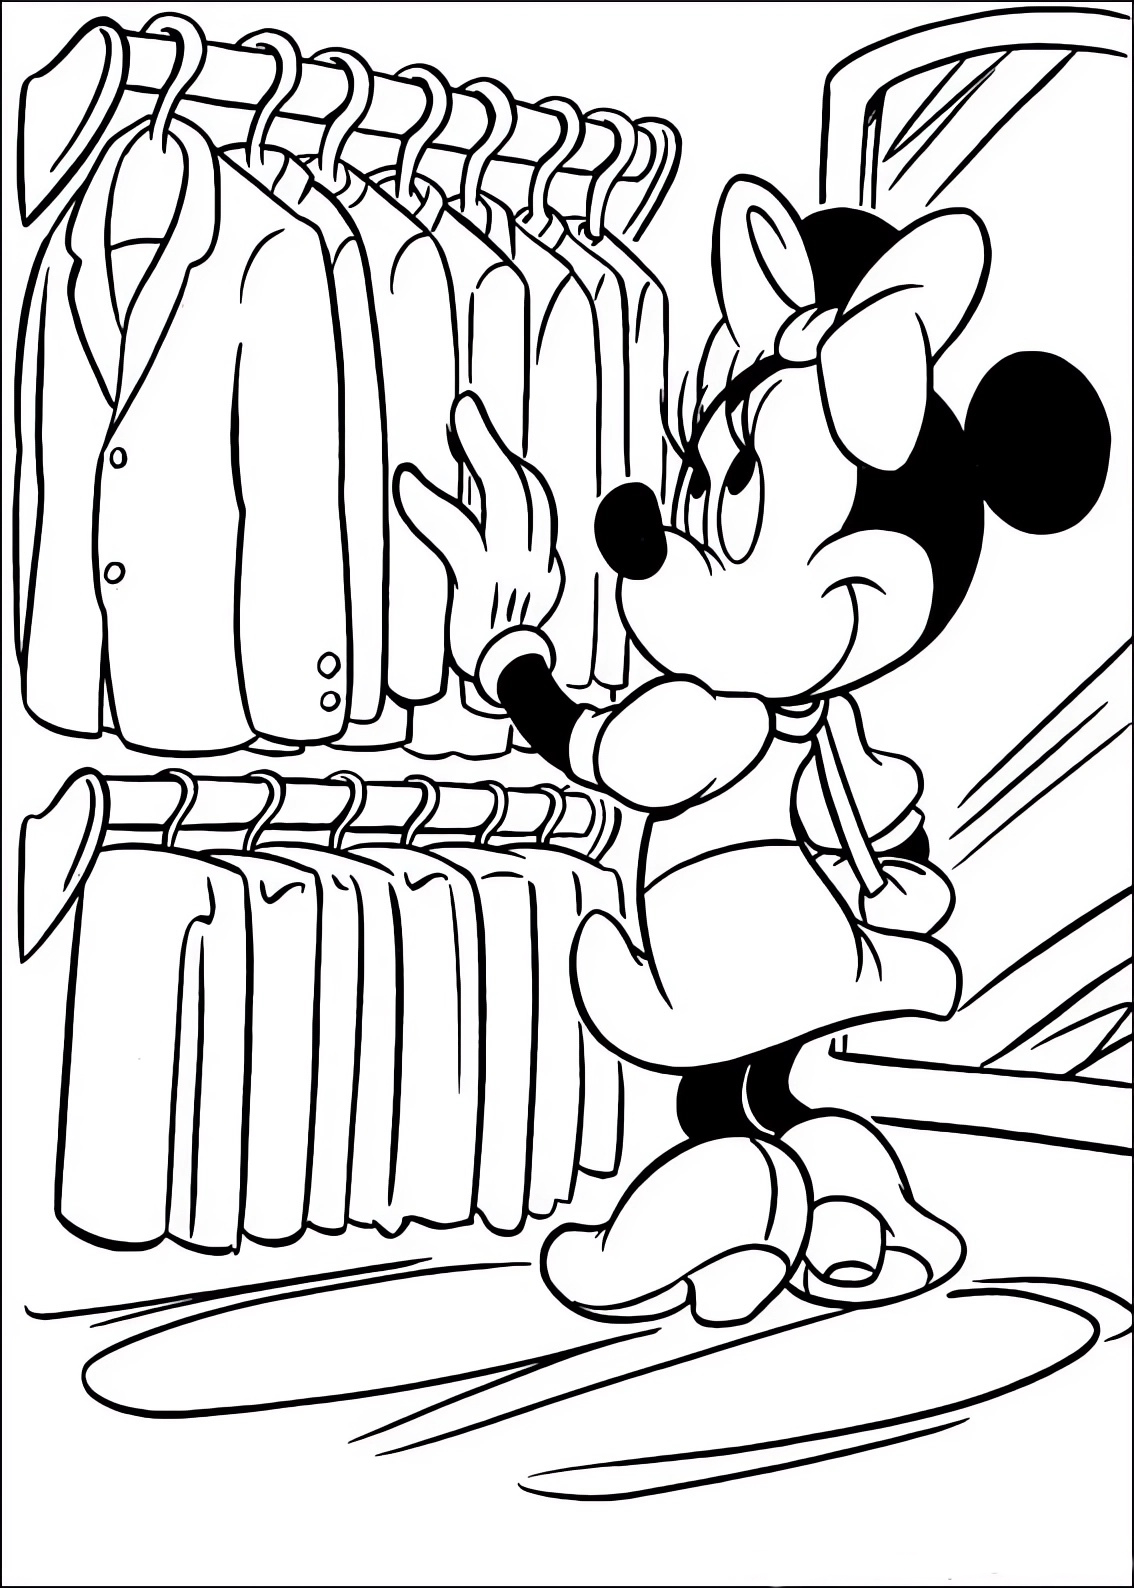 Coloring page of Minnie choosing clothes and clothes